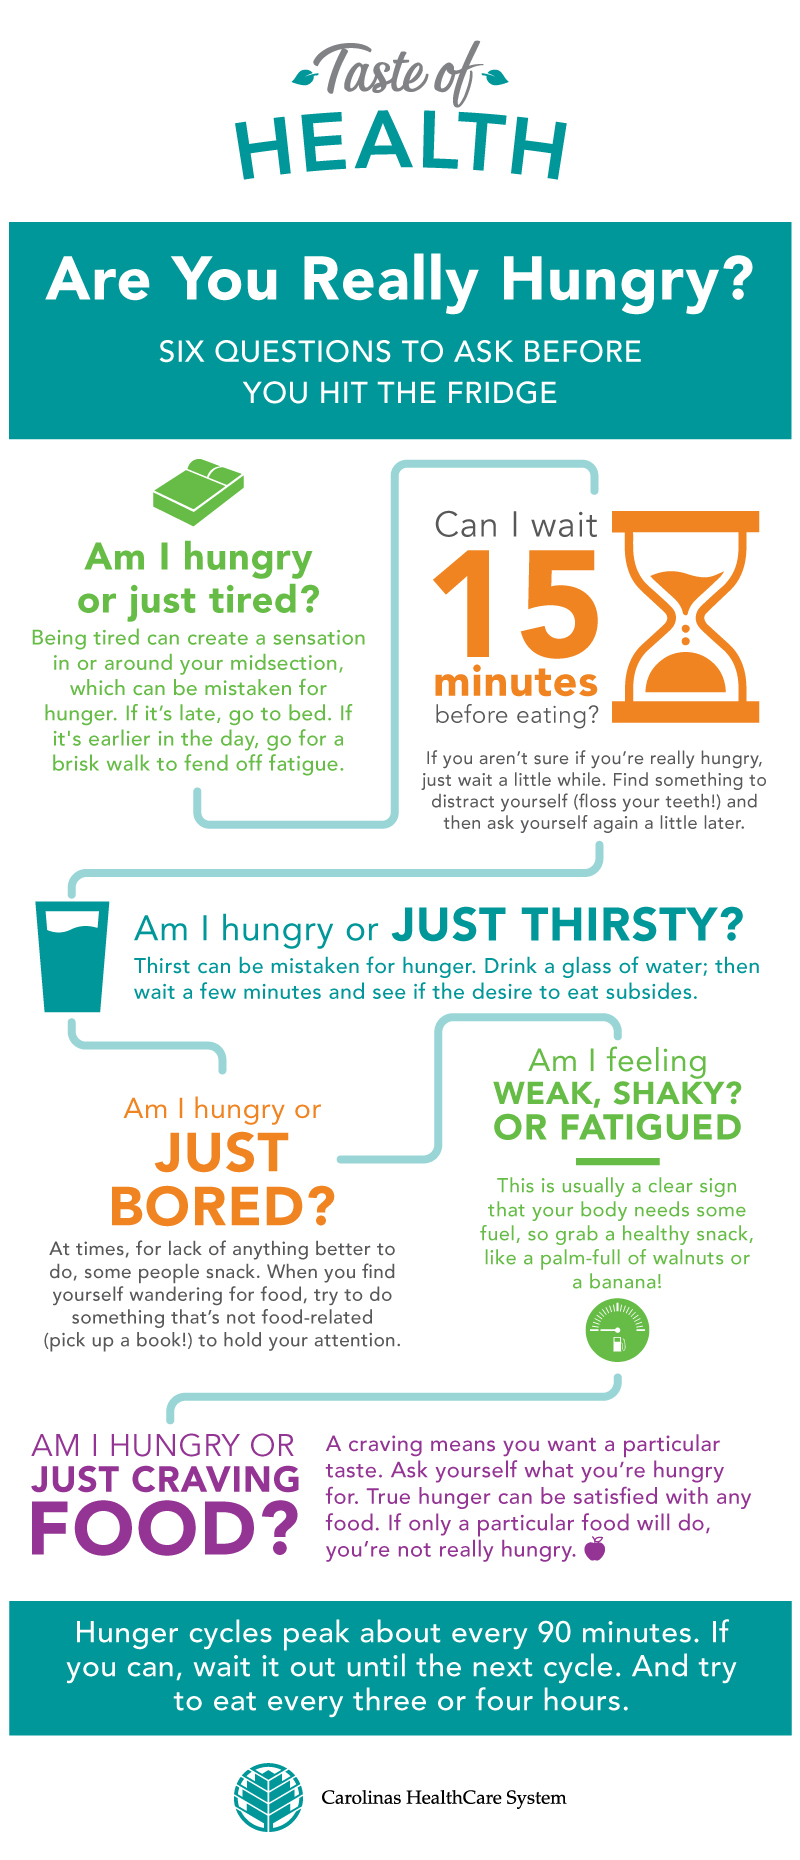 Are You Really Hungry? [Infographic]